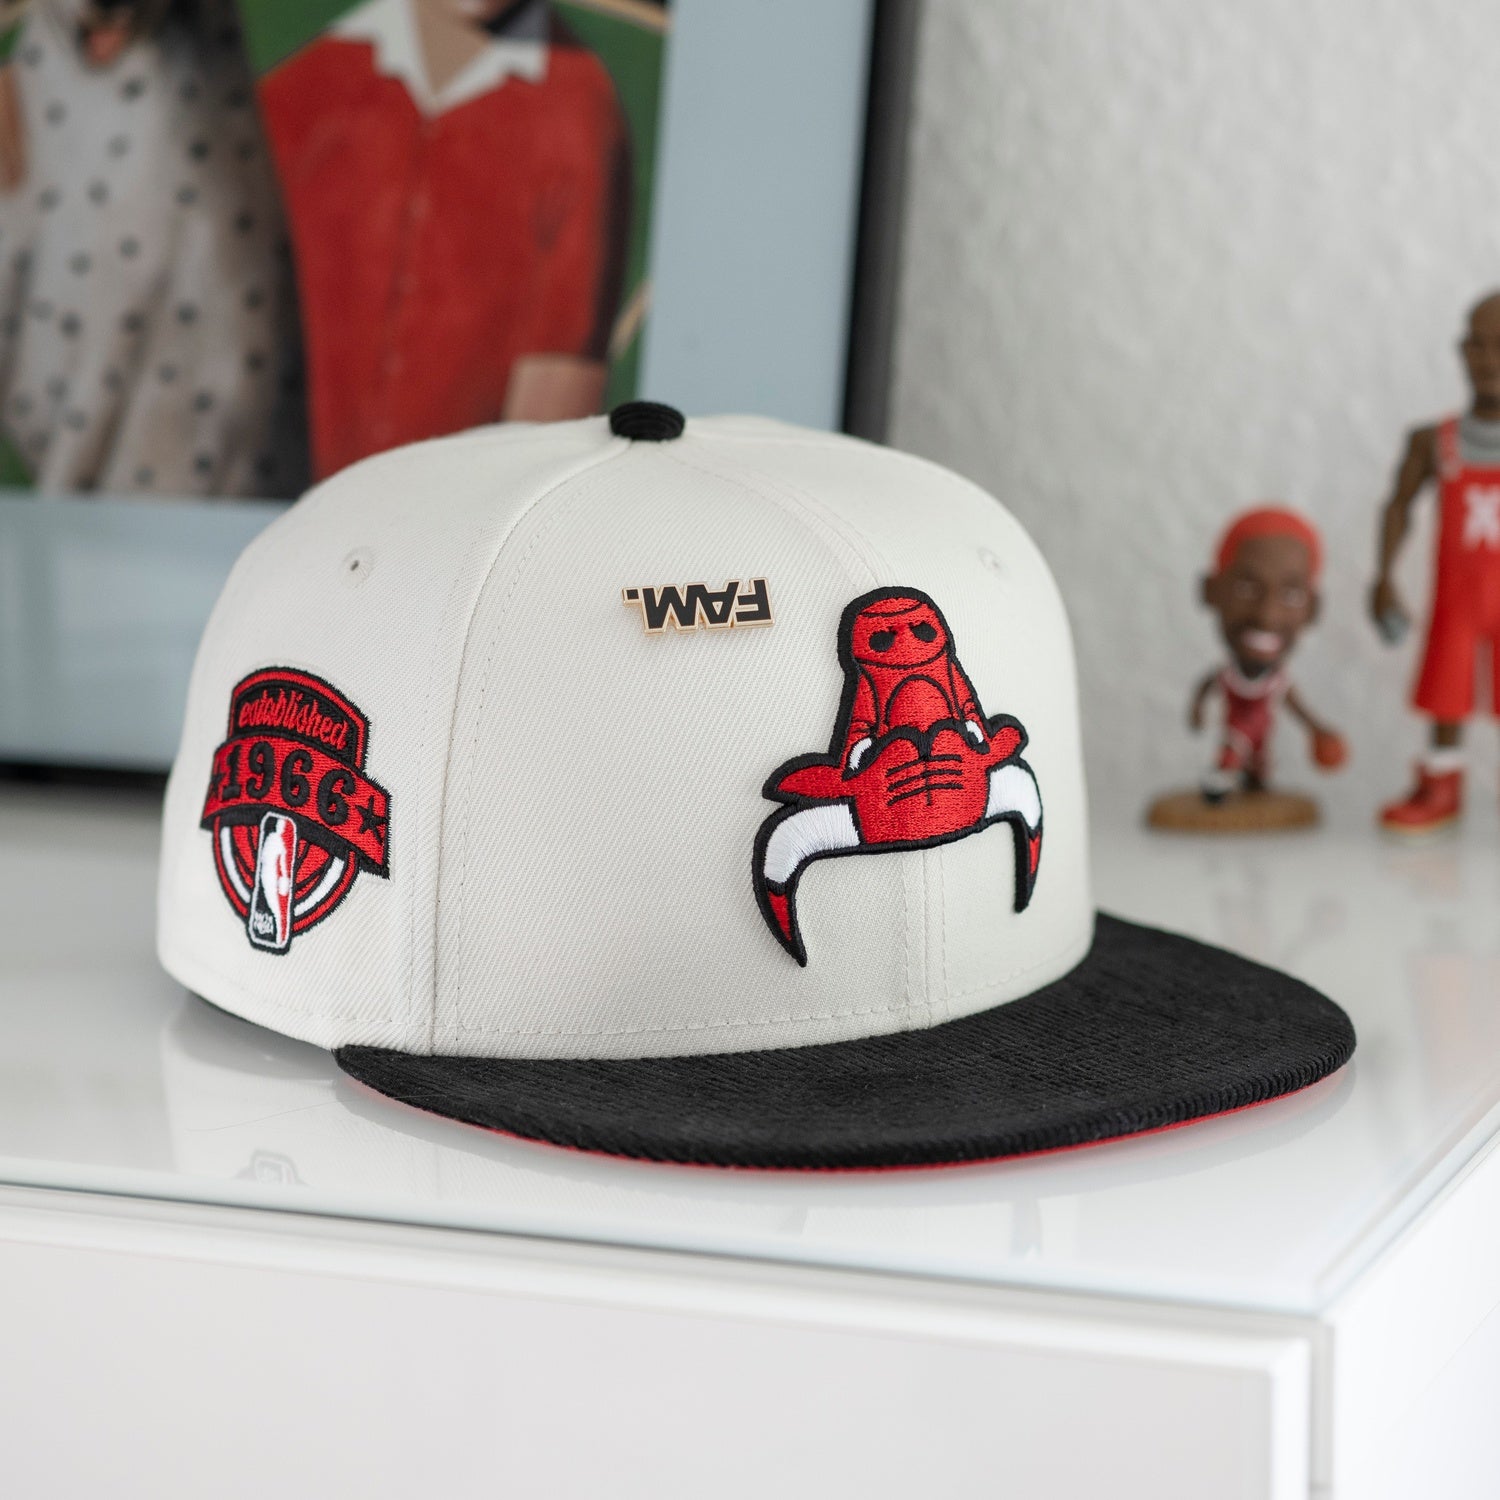 NEW ERA 59FIFTY NBA CHICAGO BULLS ESTABLISHED 1966 TWO TONE / SCARLET UV FITTED CAP